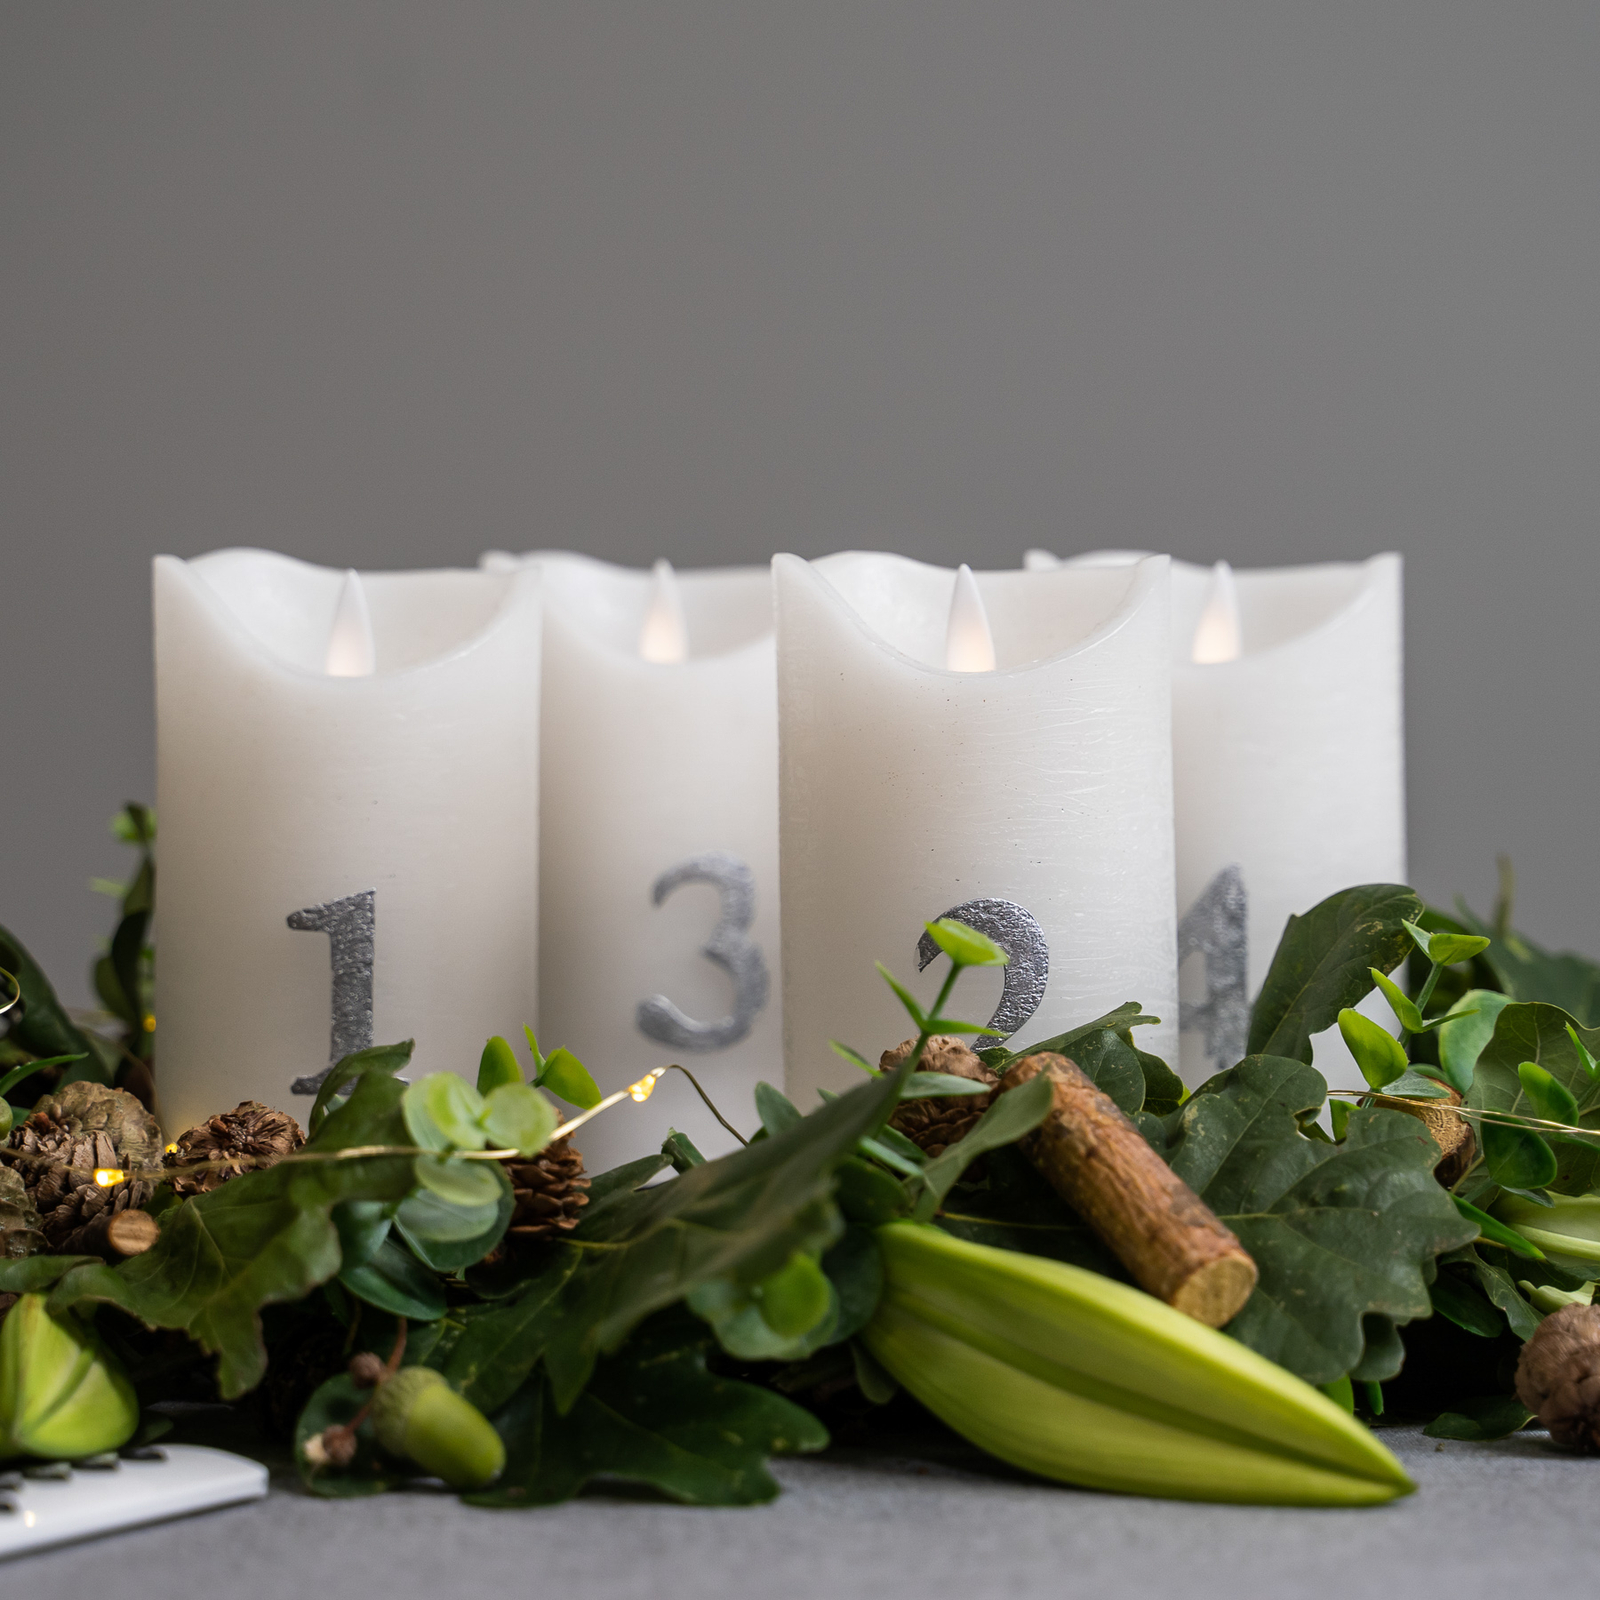 LED candle Sara Advent 4pcs height 12.5cm white/silver